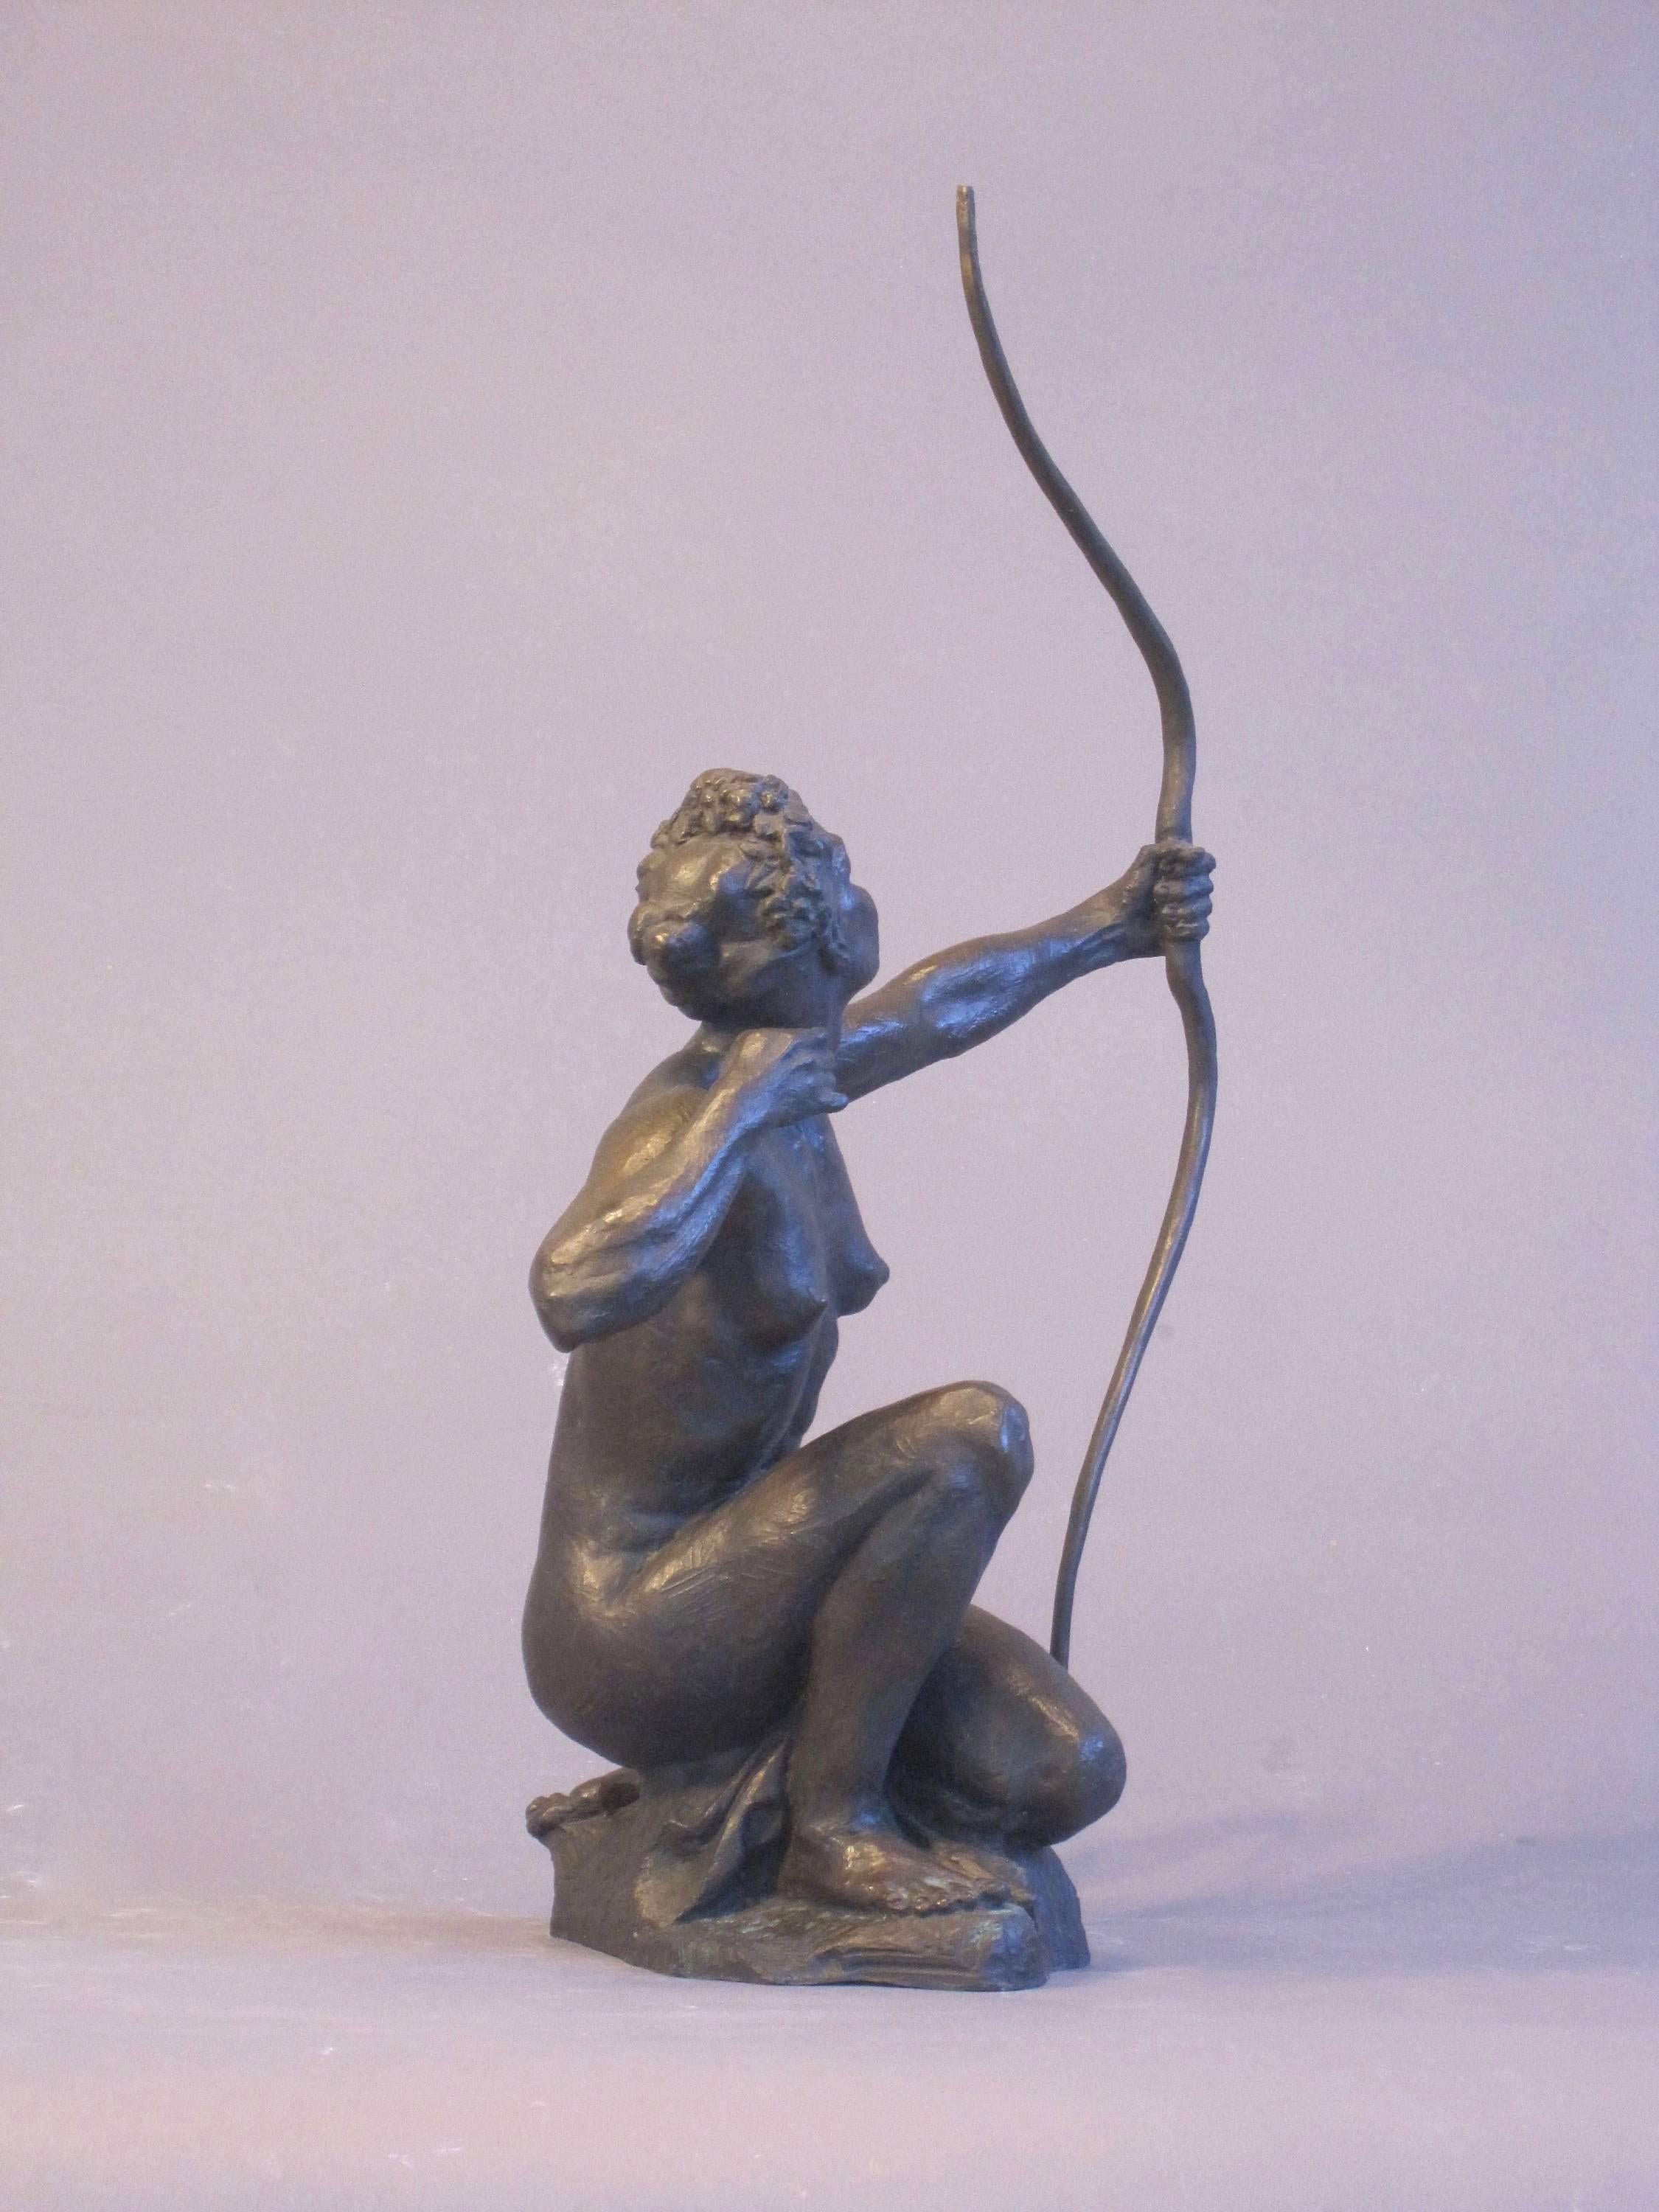 A bronze sculpture of the Roman goddess Diana. She was the goddess of the hunt, the moon, and nature in Roman mythology, associated with wild animals and woodland, and having the power to talk to and control animals. She was equated with the Greek